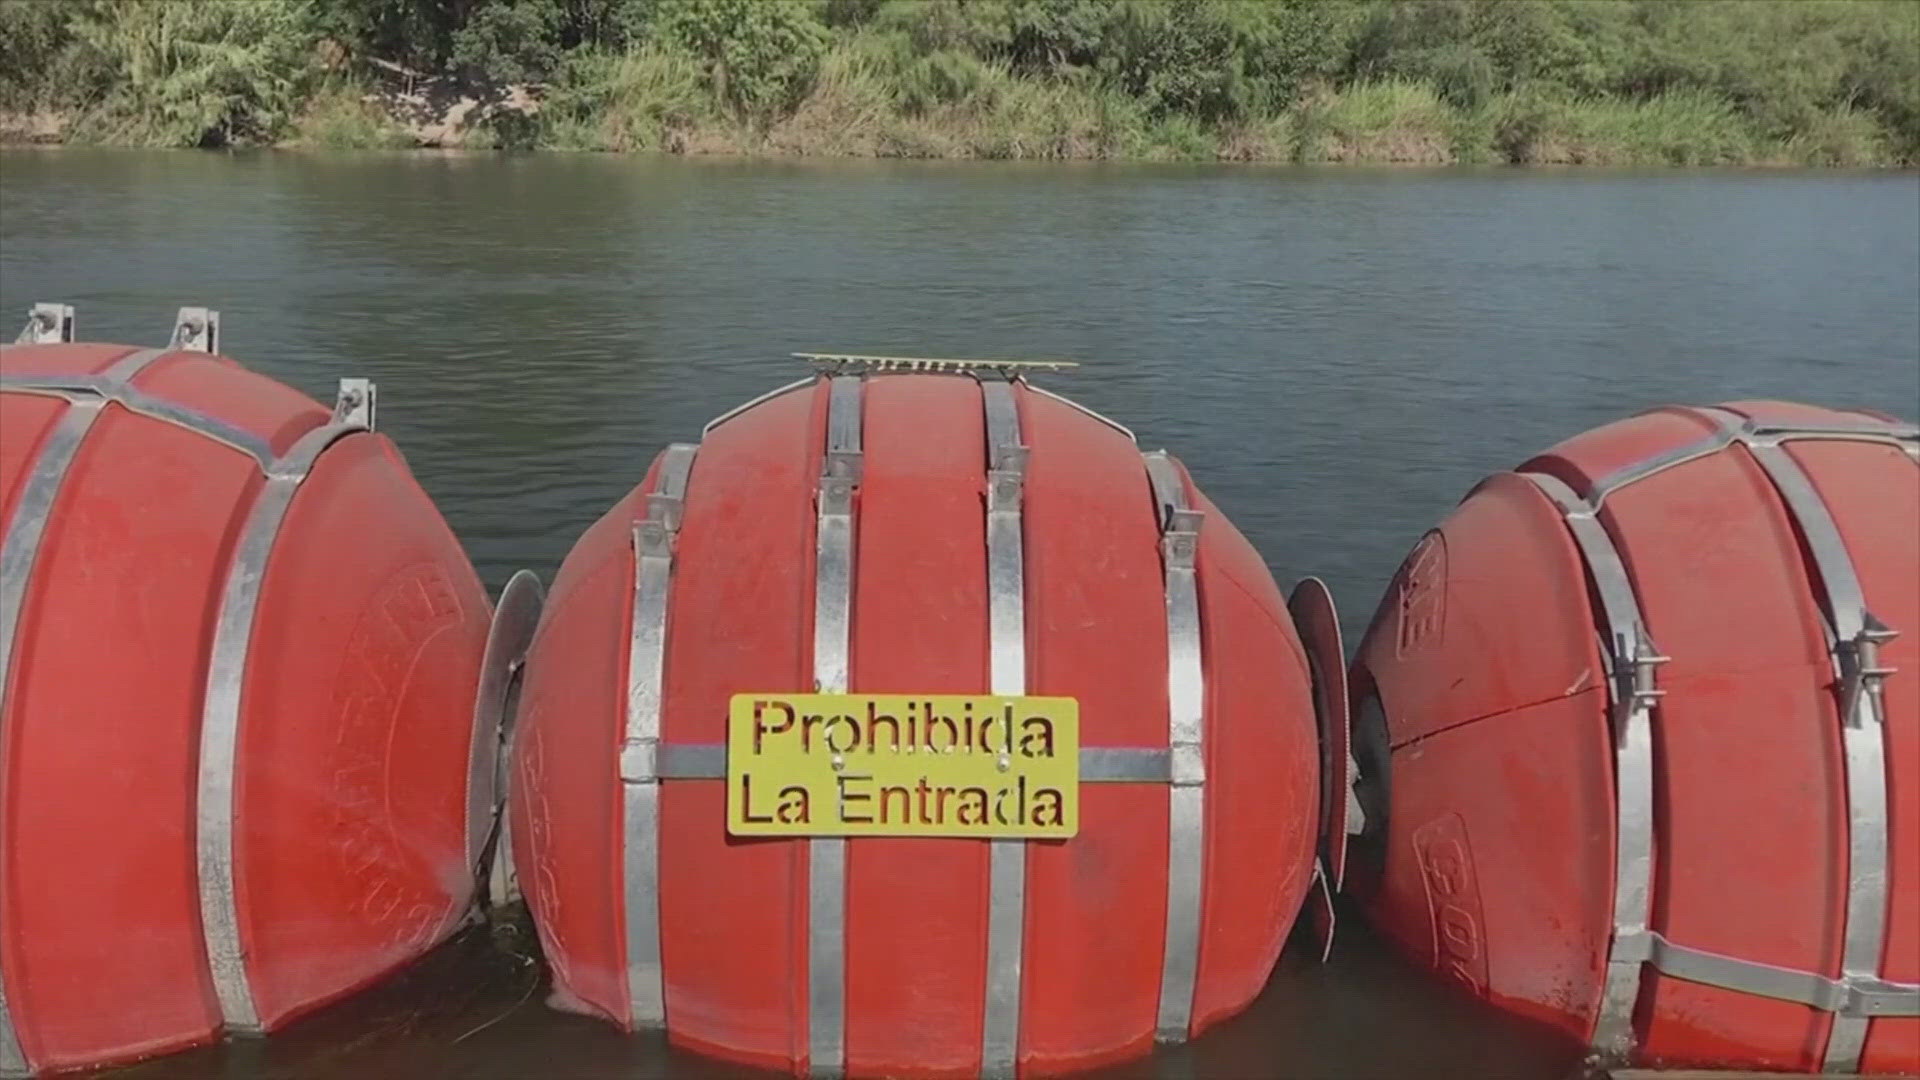 The ruling means Texas can keep the buoys in the Rio Grande River to prevent people from crossing the border -- for now.